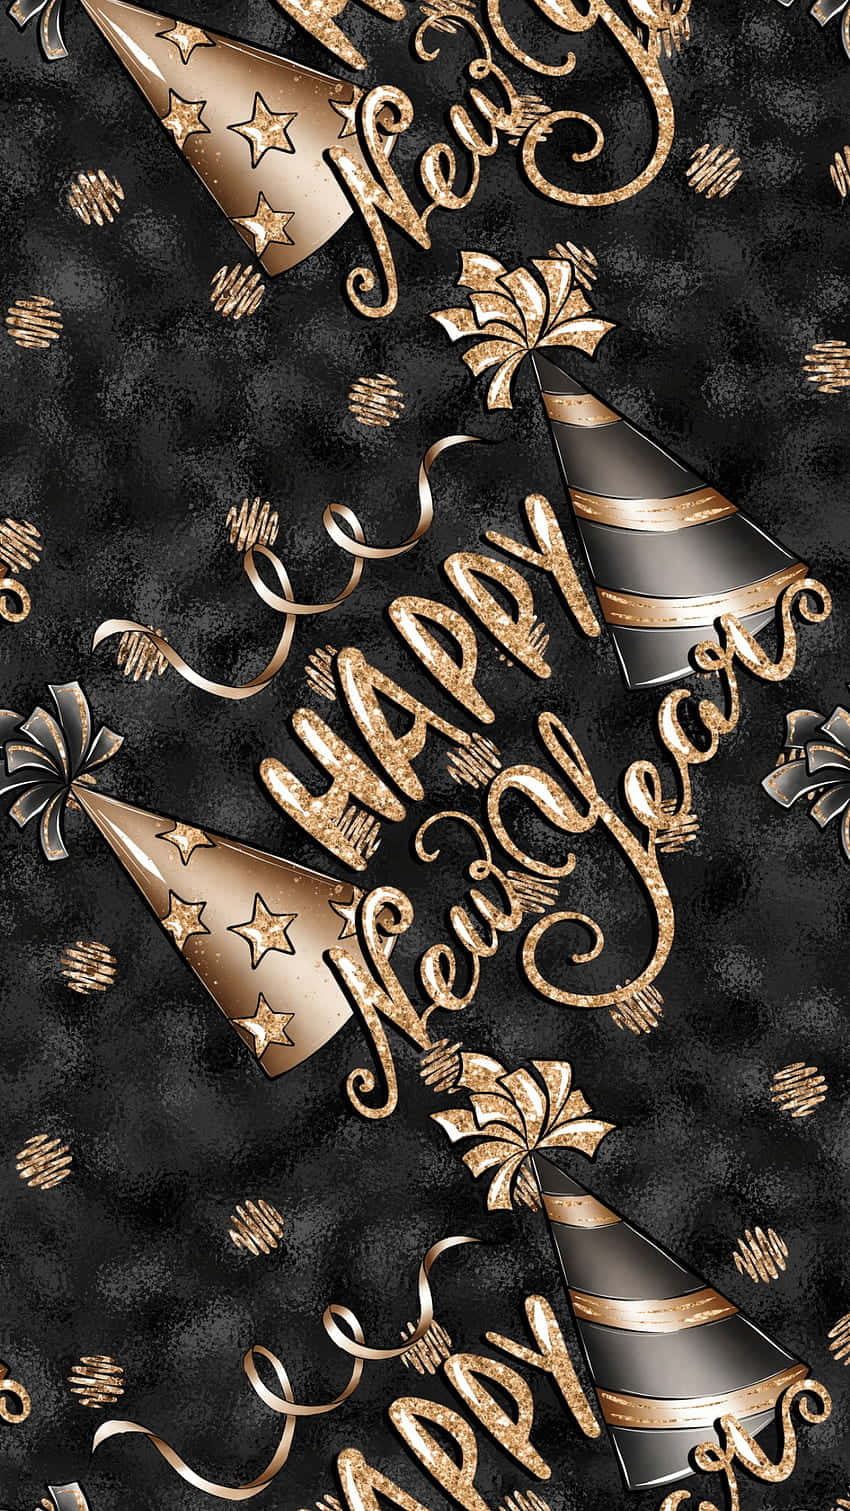 Happy New Year 2013 iPhone Wallpapers Free Download